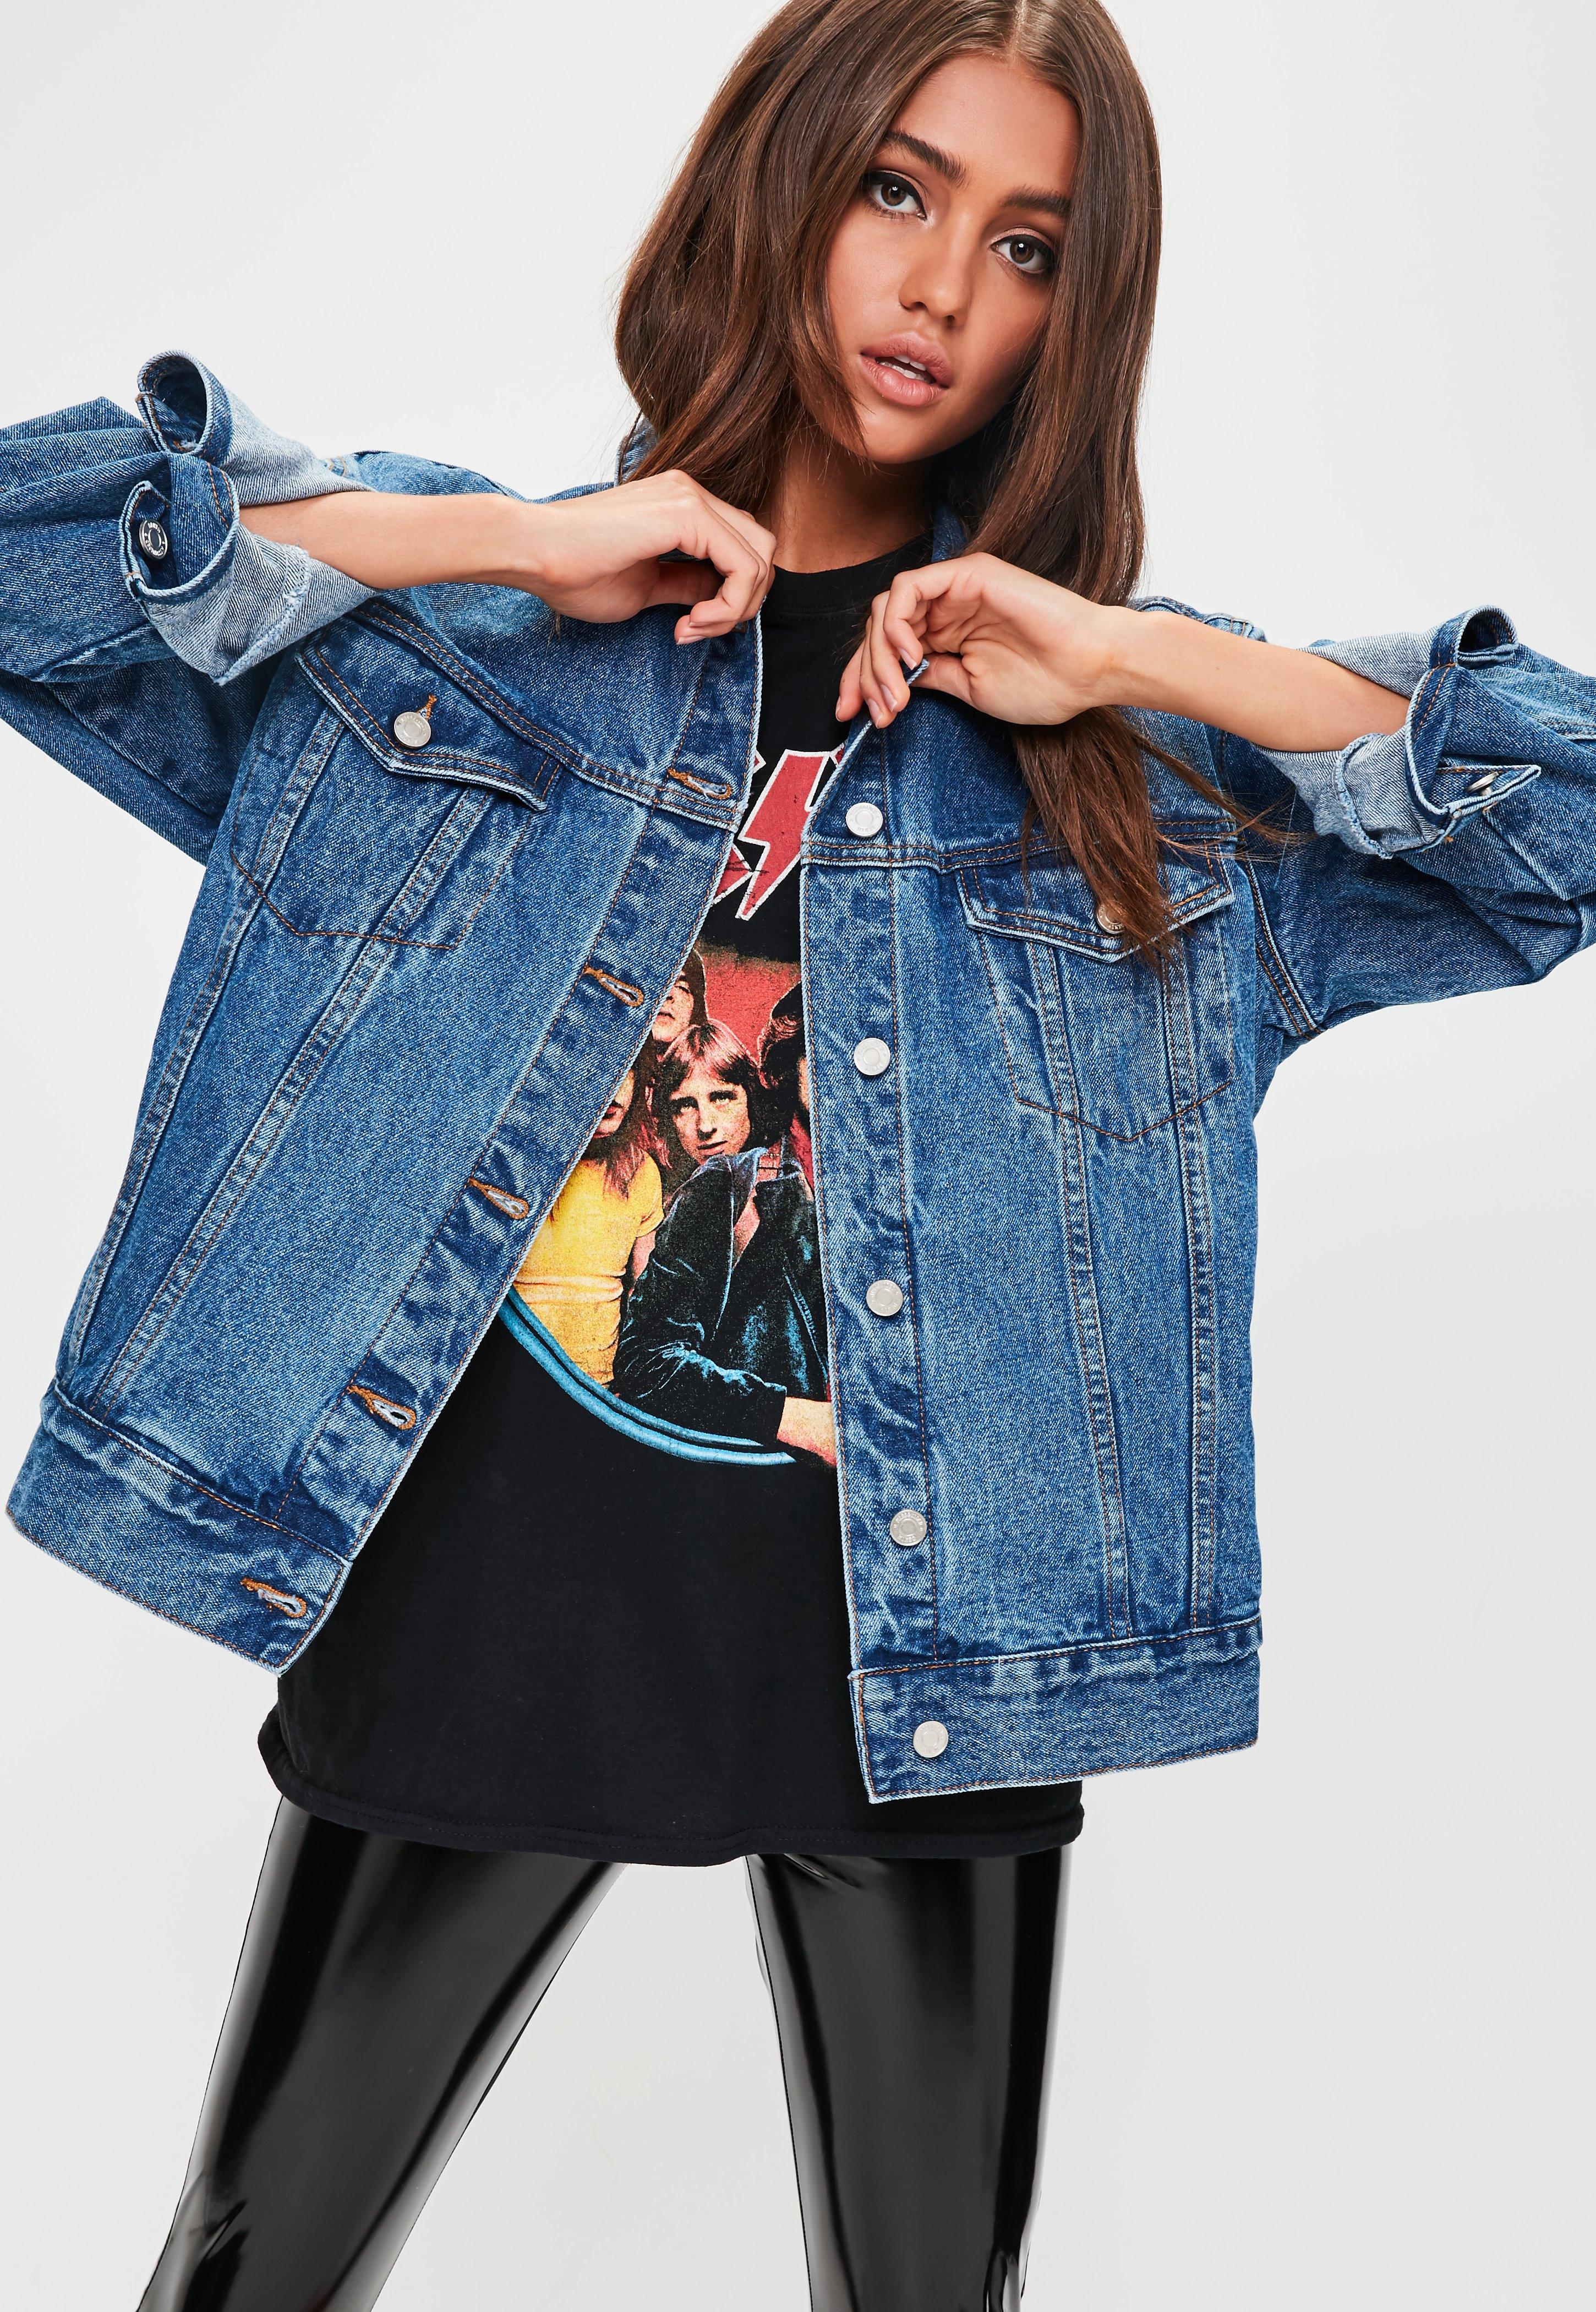 Lyst - Missguided Blue Oversized Denim Jacket in Blue - Save 13. ...